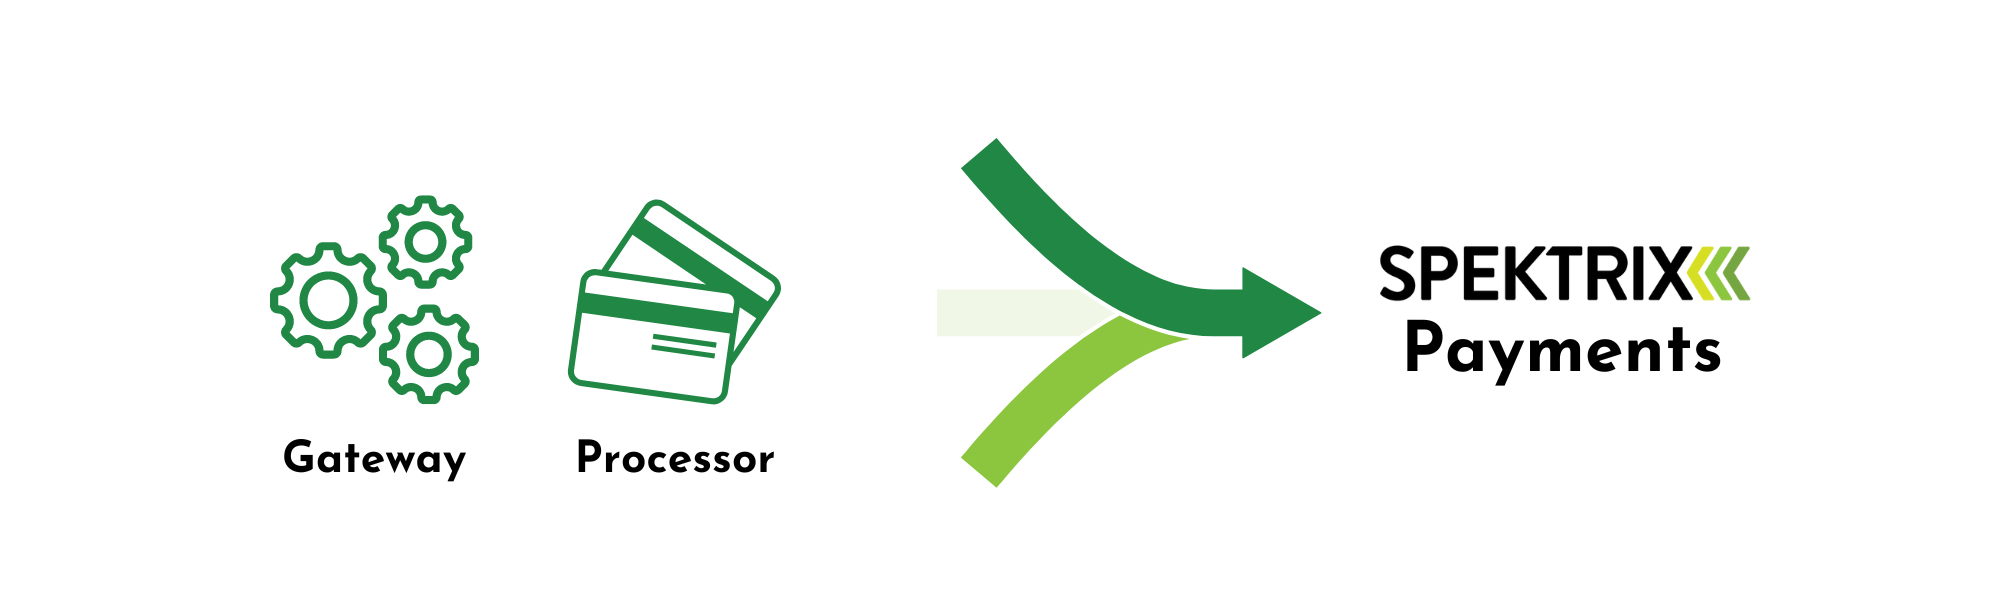 icons showing gears and credit cards labeled "gateway" and "processor" with arrows merging into "Spektrix Payments"